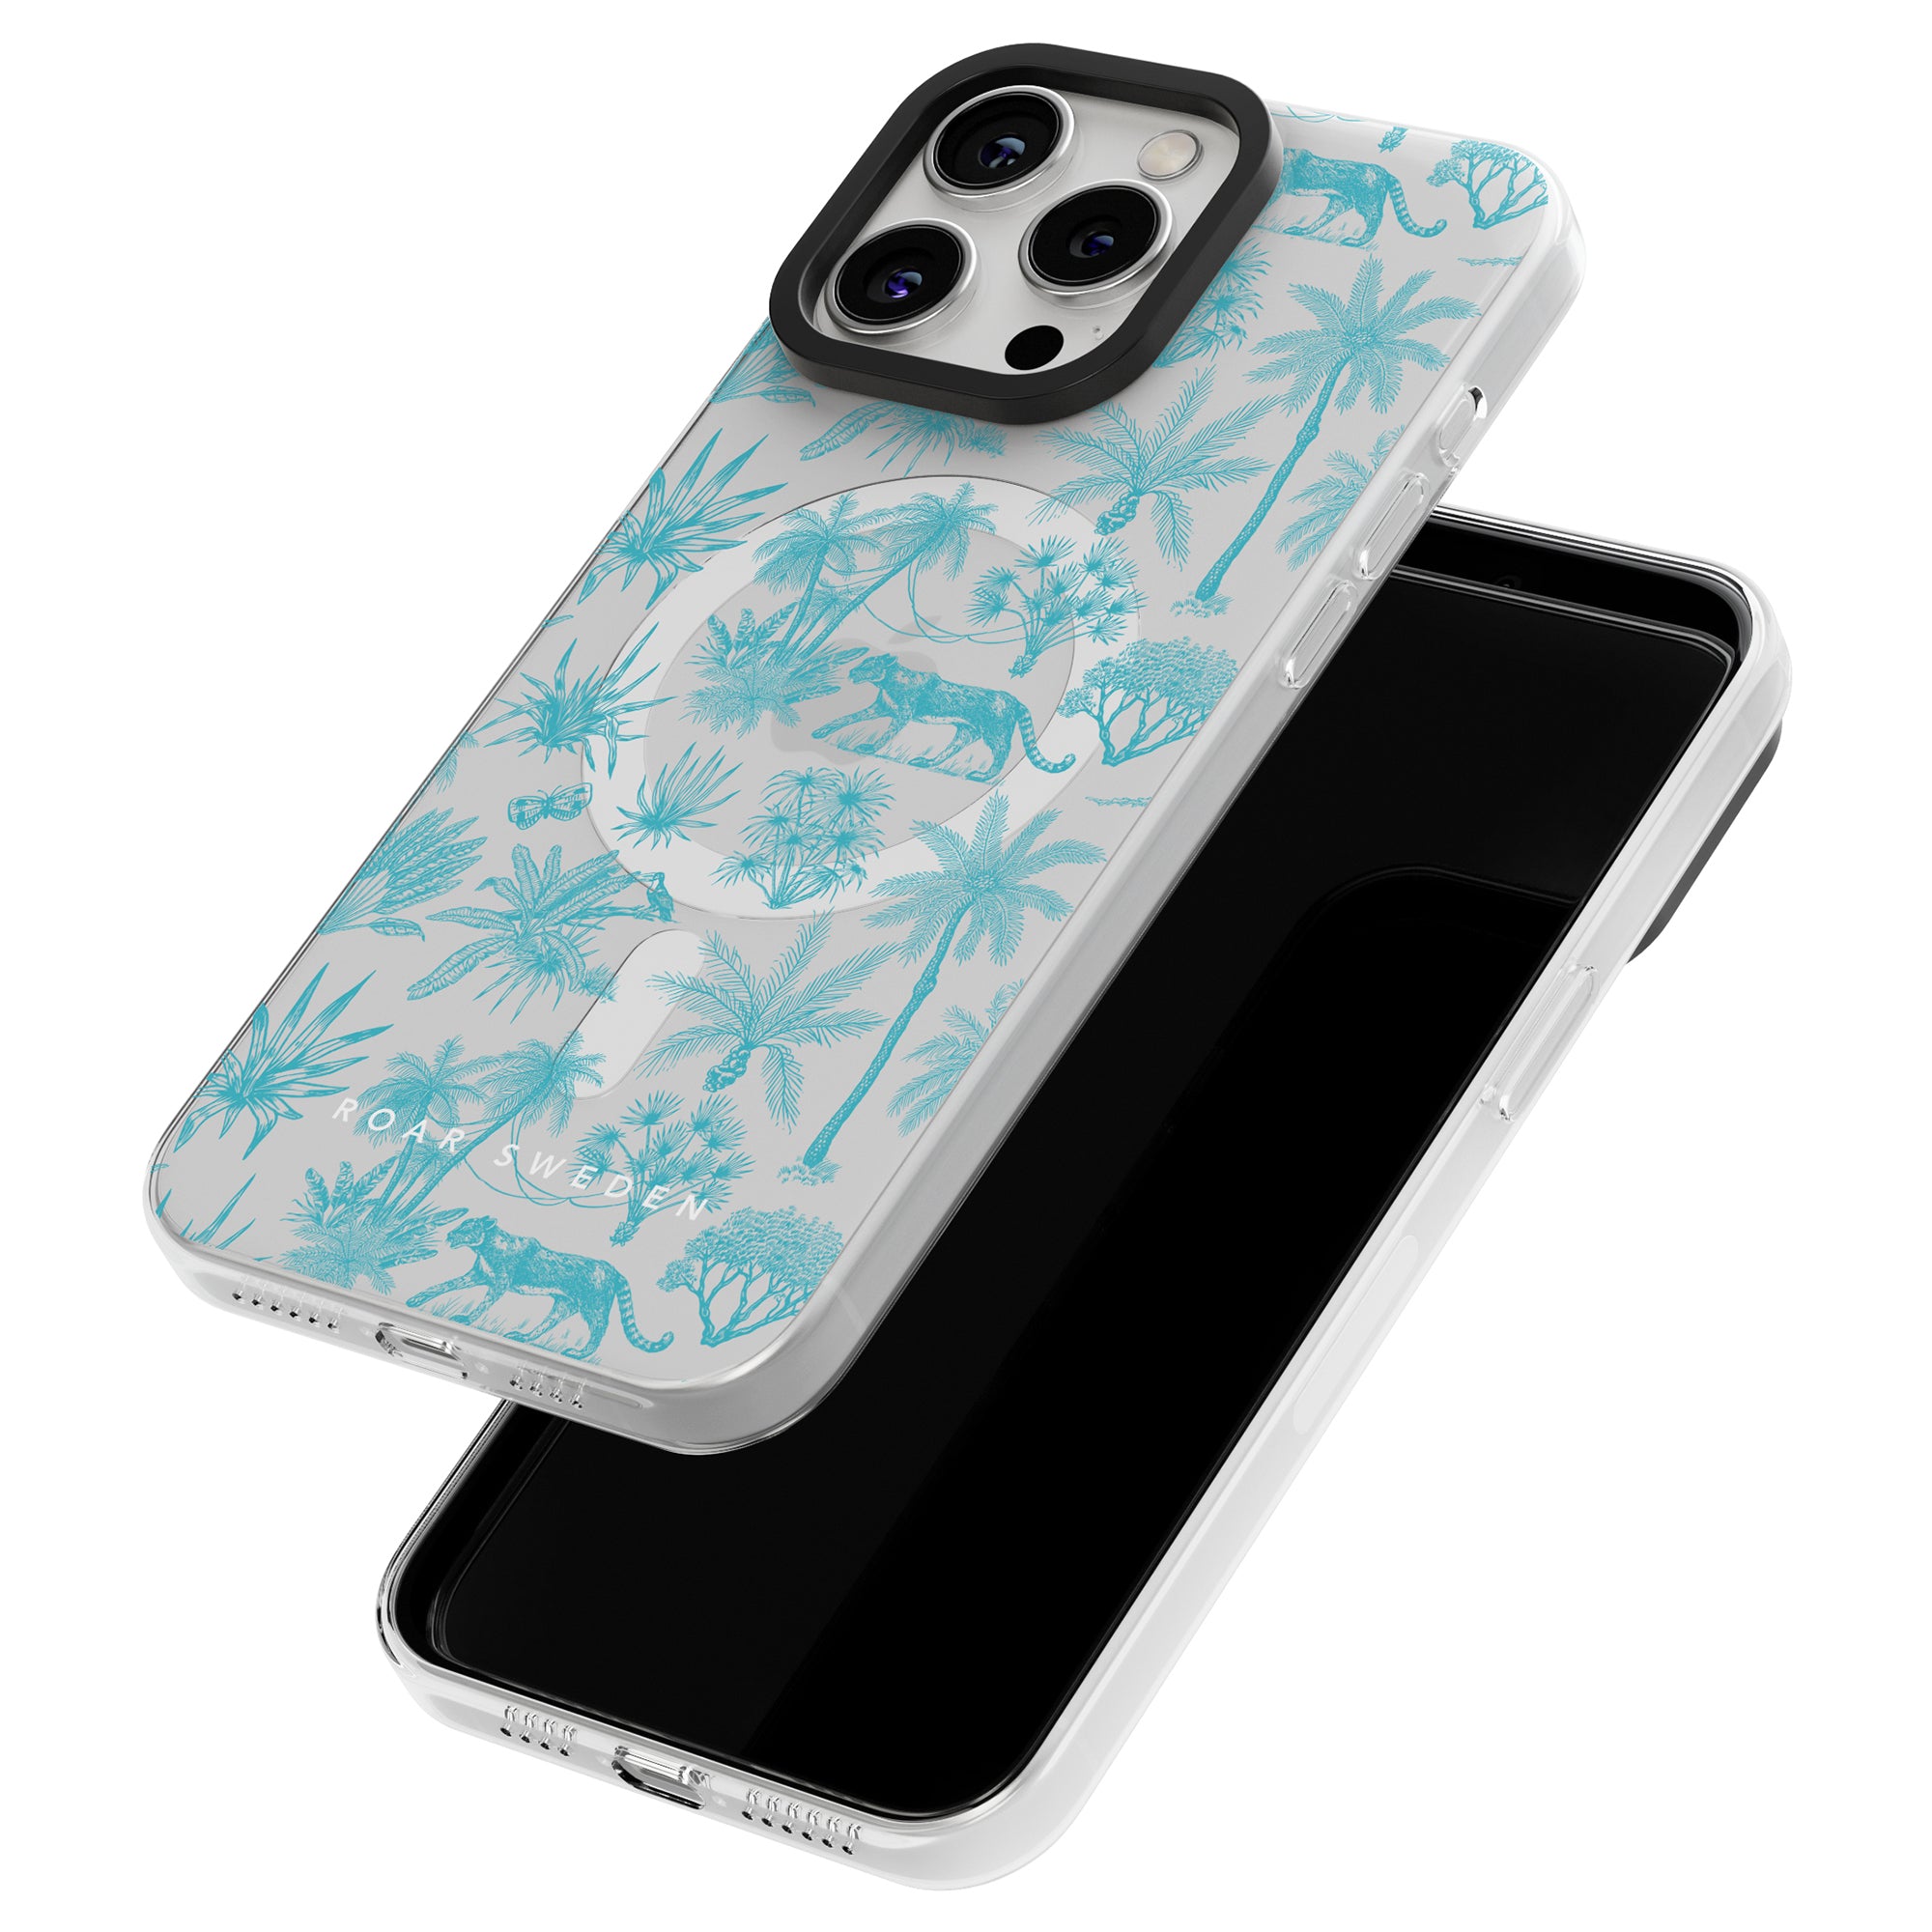 Two smartphones with light blue tropical-themed cases featuring palm trees and jungle animals. One phone is face down, showing the stunning case design which is Toile De Jouy Capri - MagSafe compatible, and the other is face-up, displaying its screen.